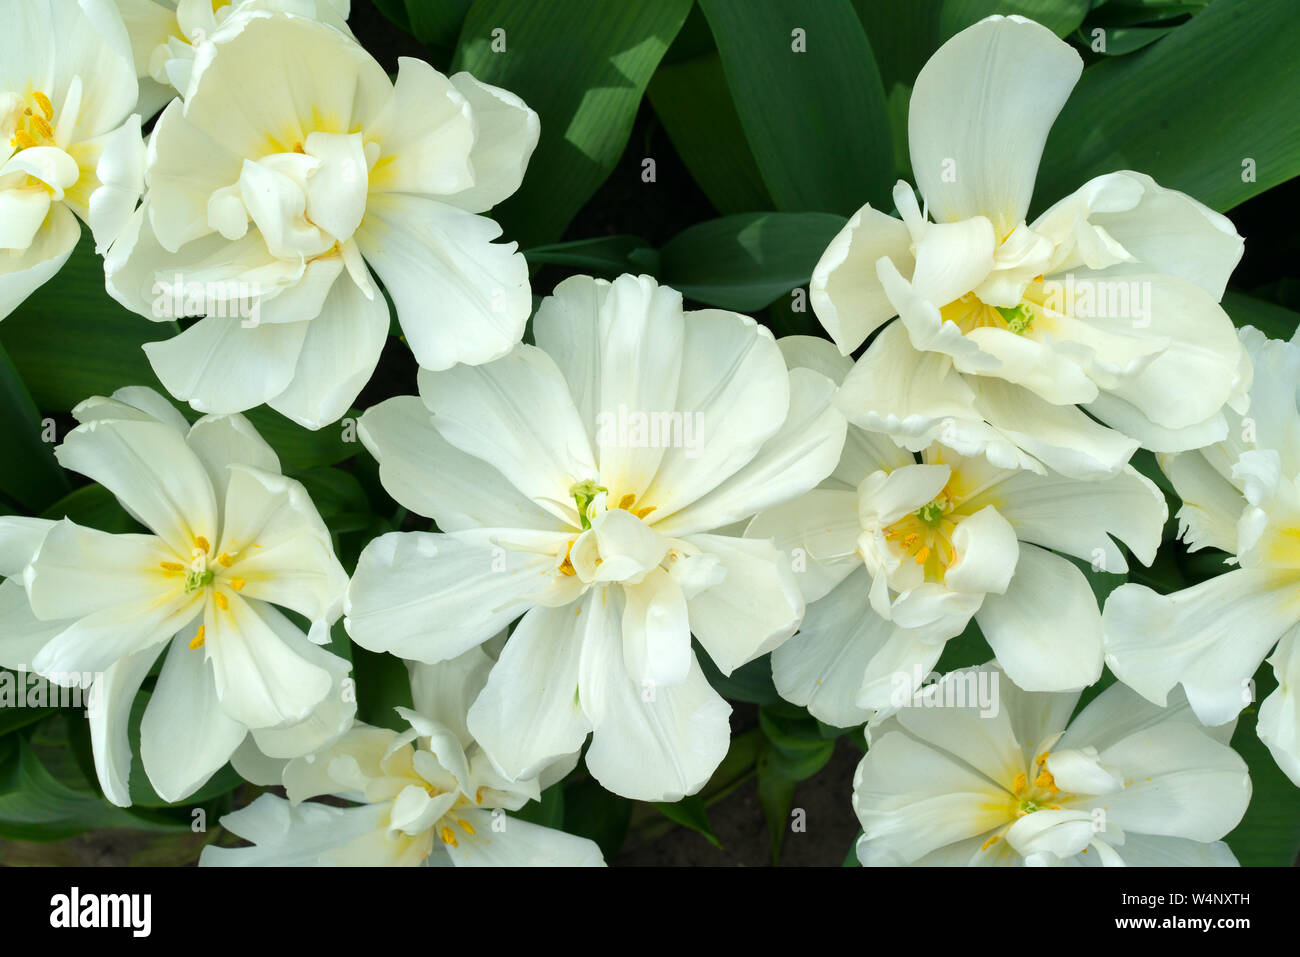 opened white flowers of tulips with yellow centers and yellow stamens Stock Photo